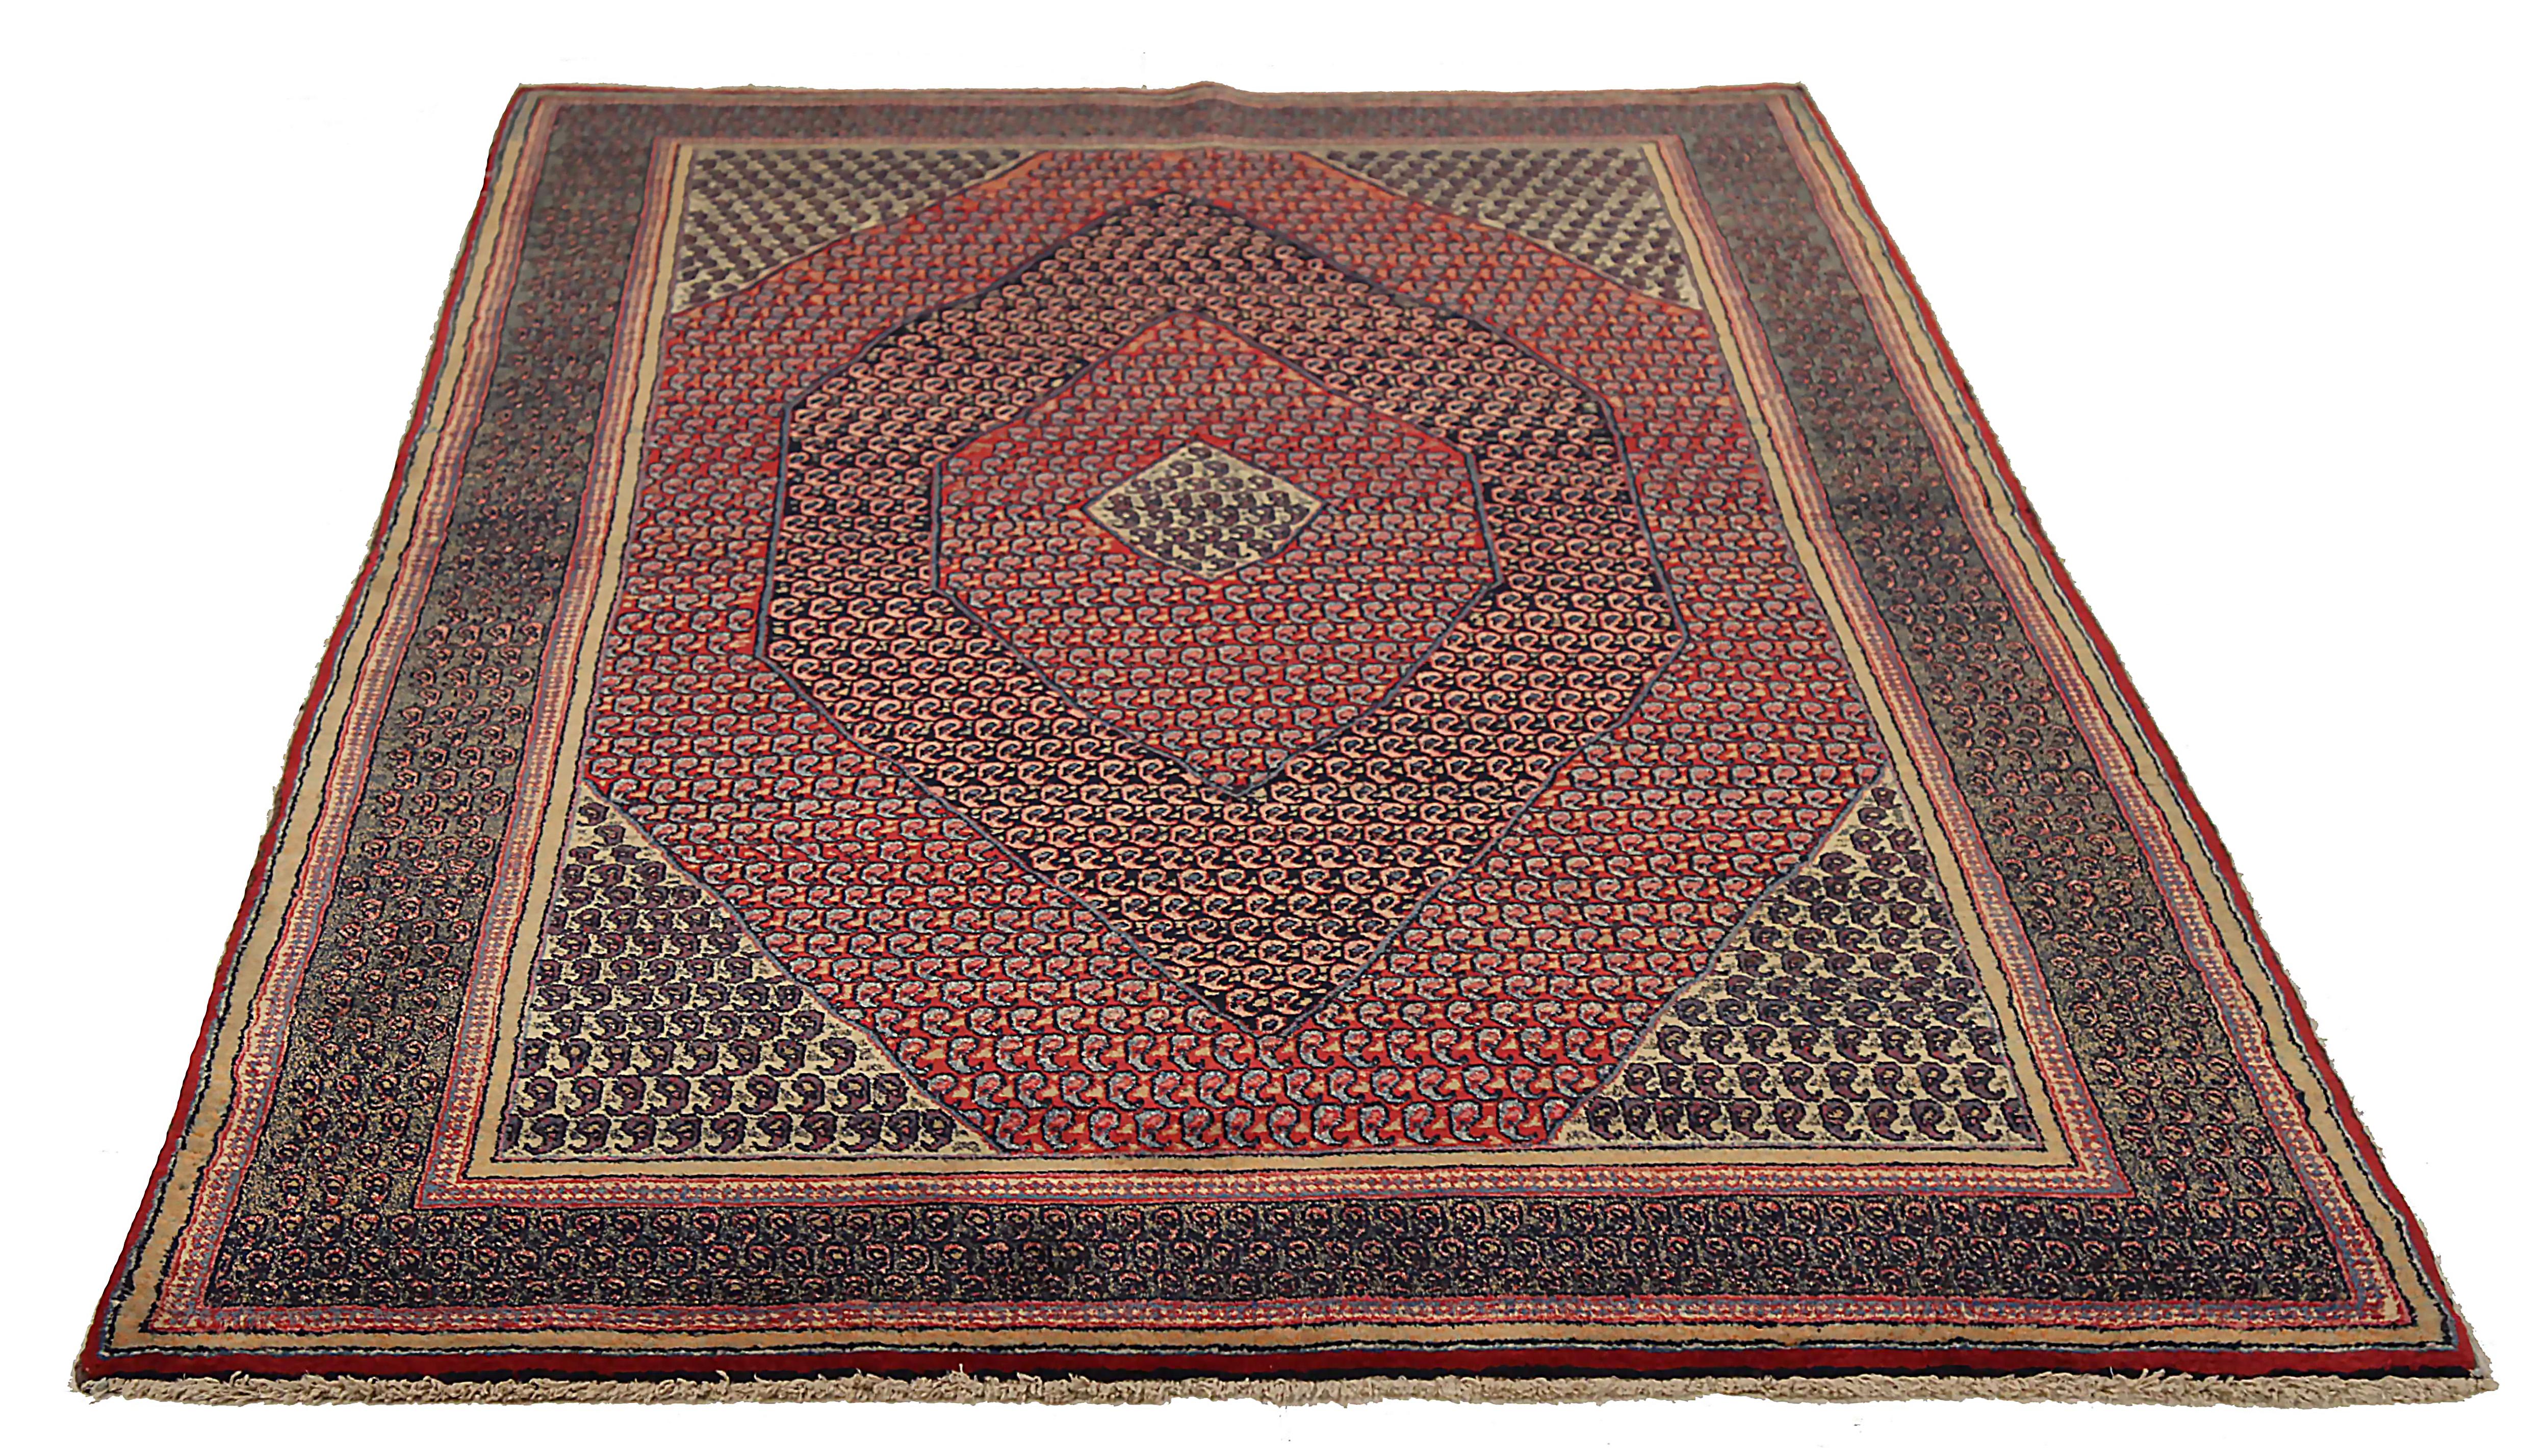 Antique Persian area rug handwoven from the finest sheep’s wool. It’s colored with all-natural vegetable dyes that are safe for humans and pets. It’s a traditional Mashad design handwoven by expert artisans. It’s a lovely area rug that can be